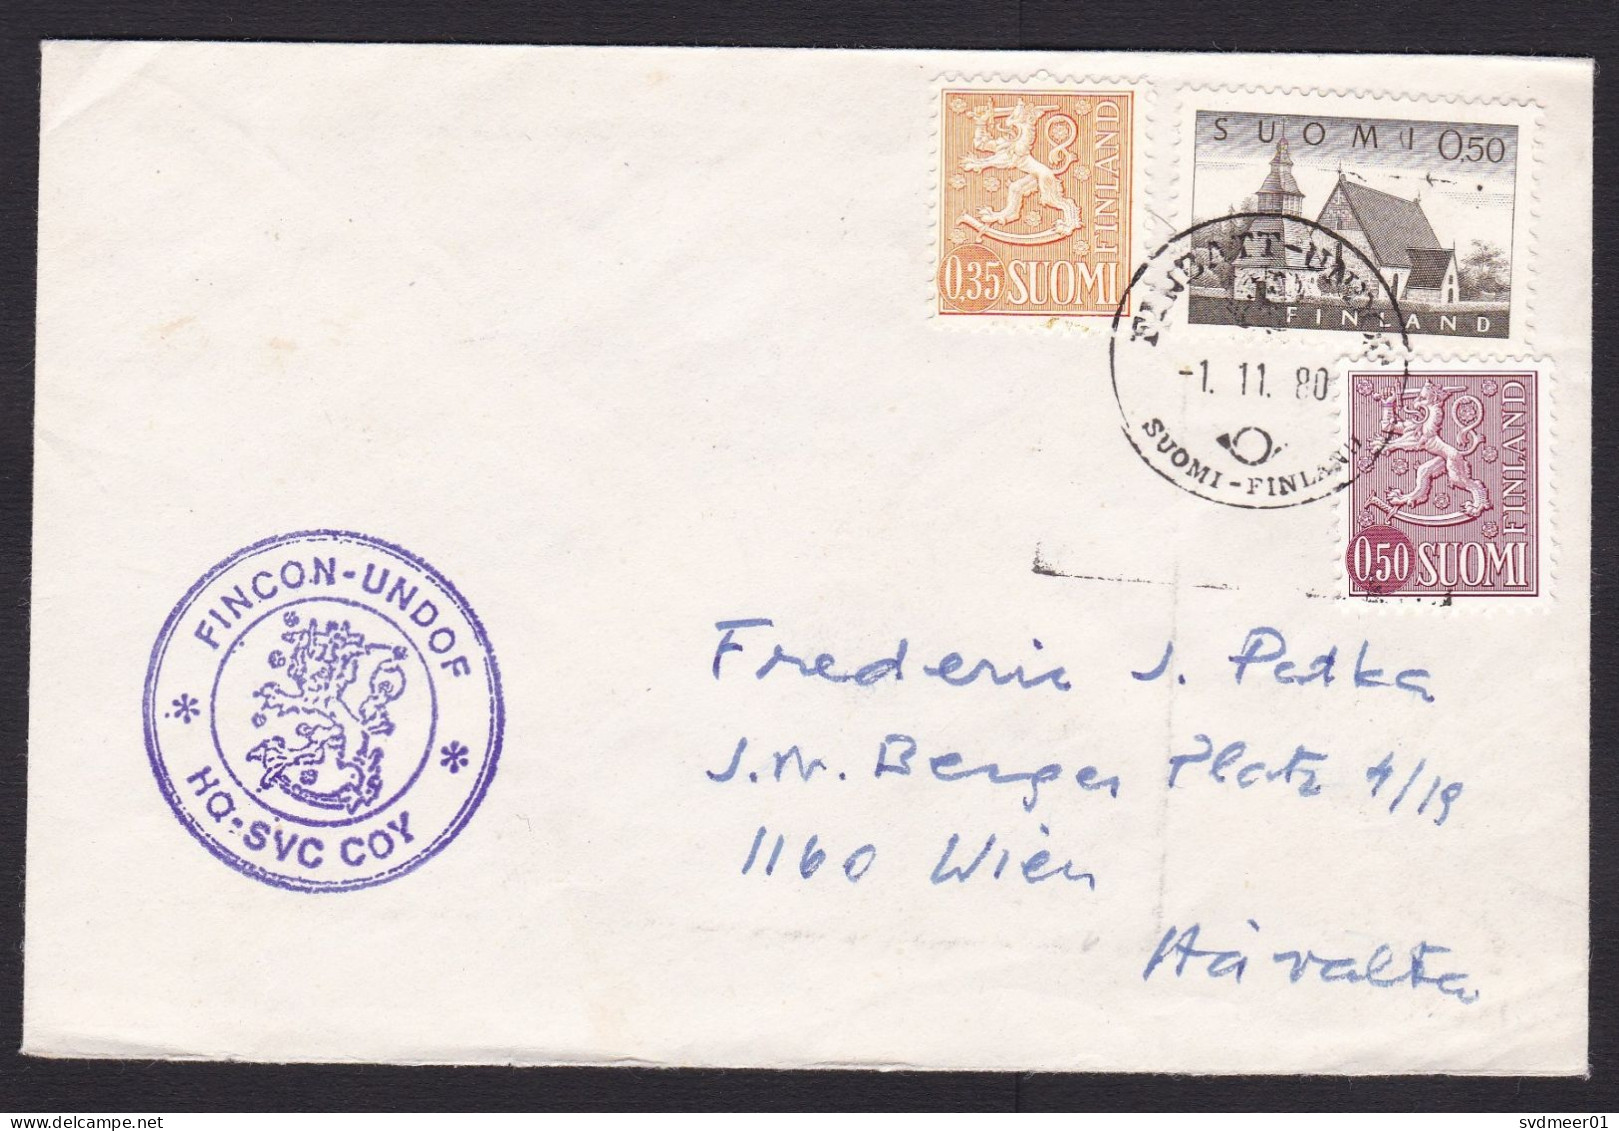 Finland: Cover To Austria, 1980, 3 Stamps, Military Cancel UNDOF, UN Forces Golan, Syria-Israel, Rare (traces Of Use) - Storia Postale